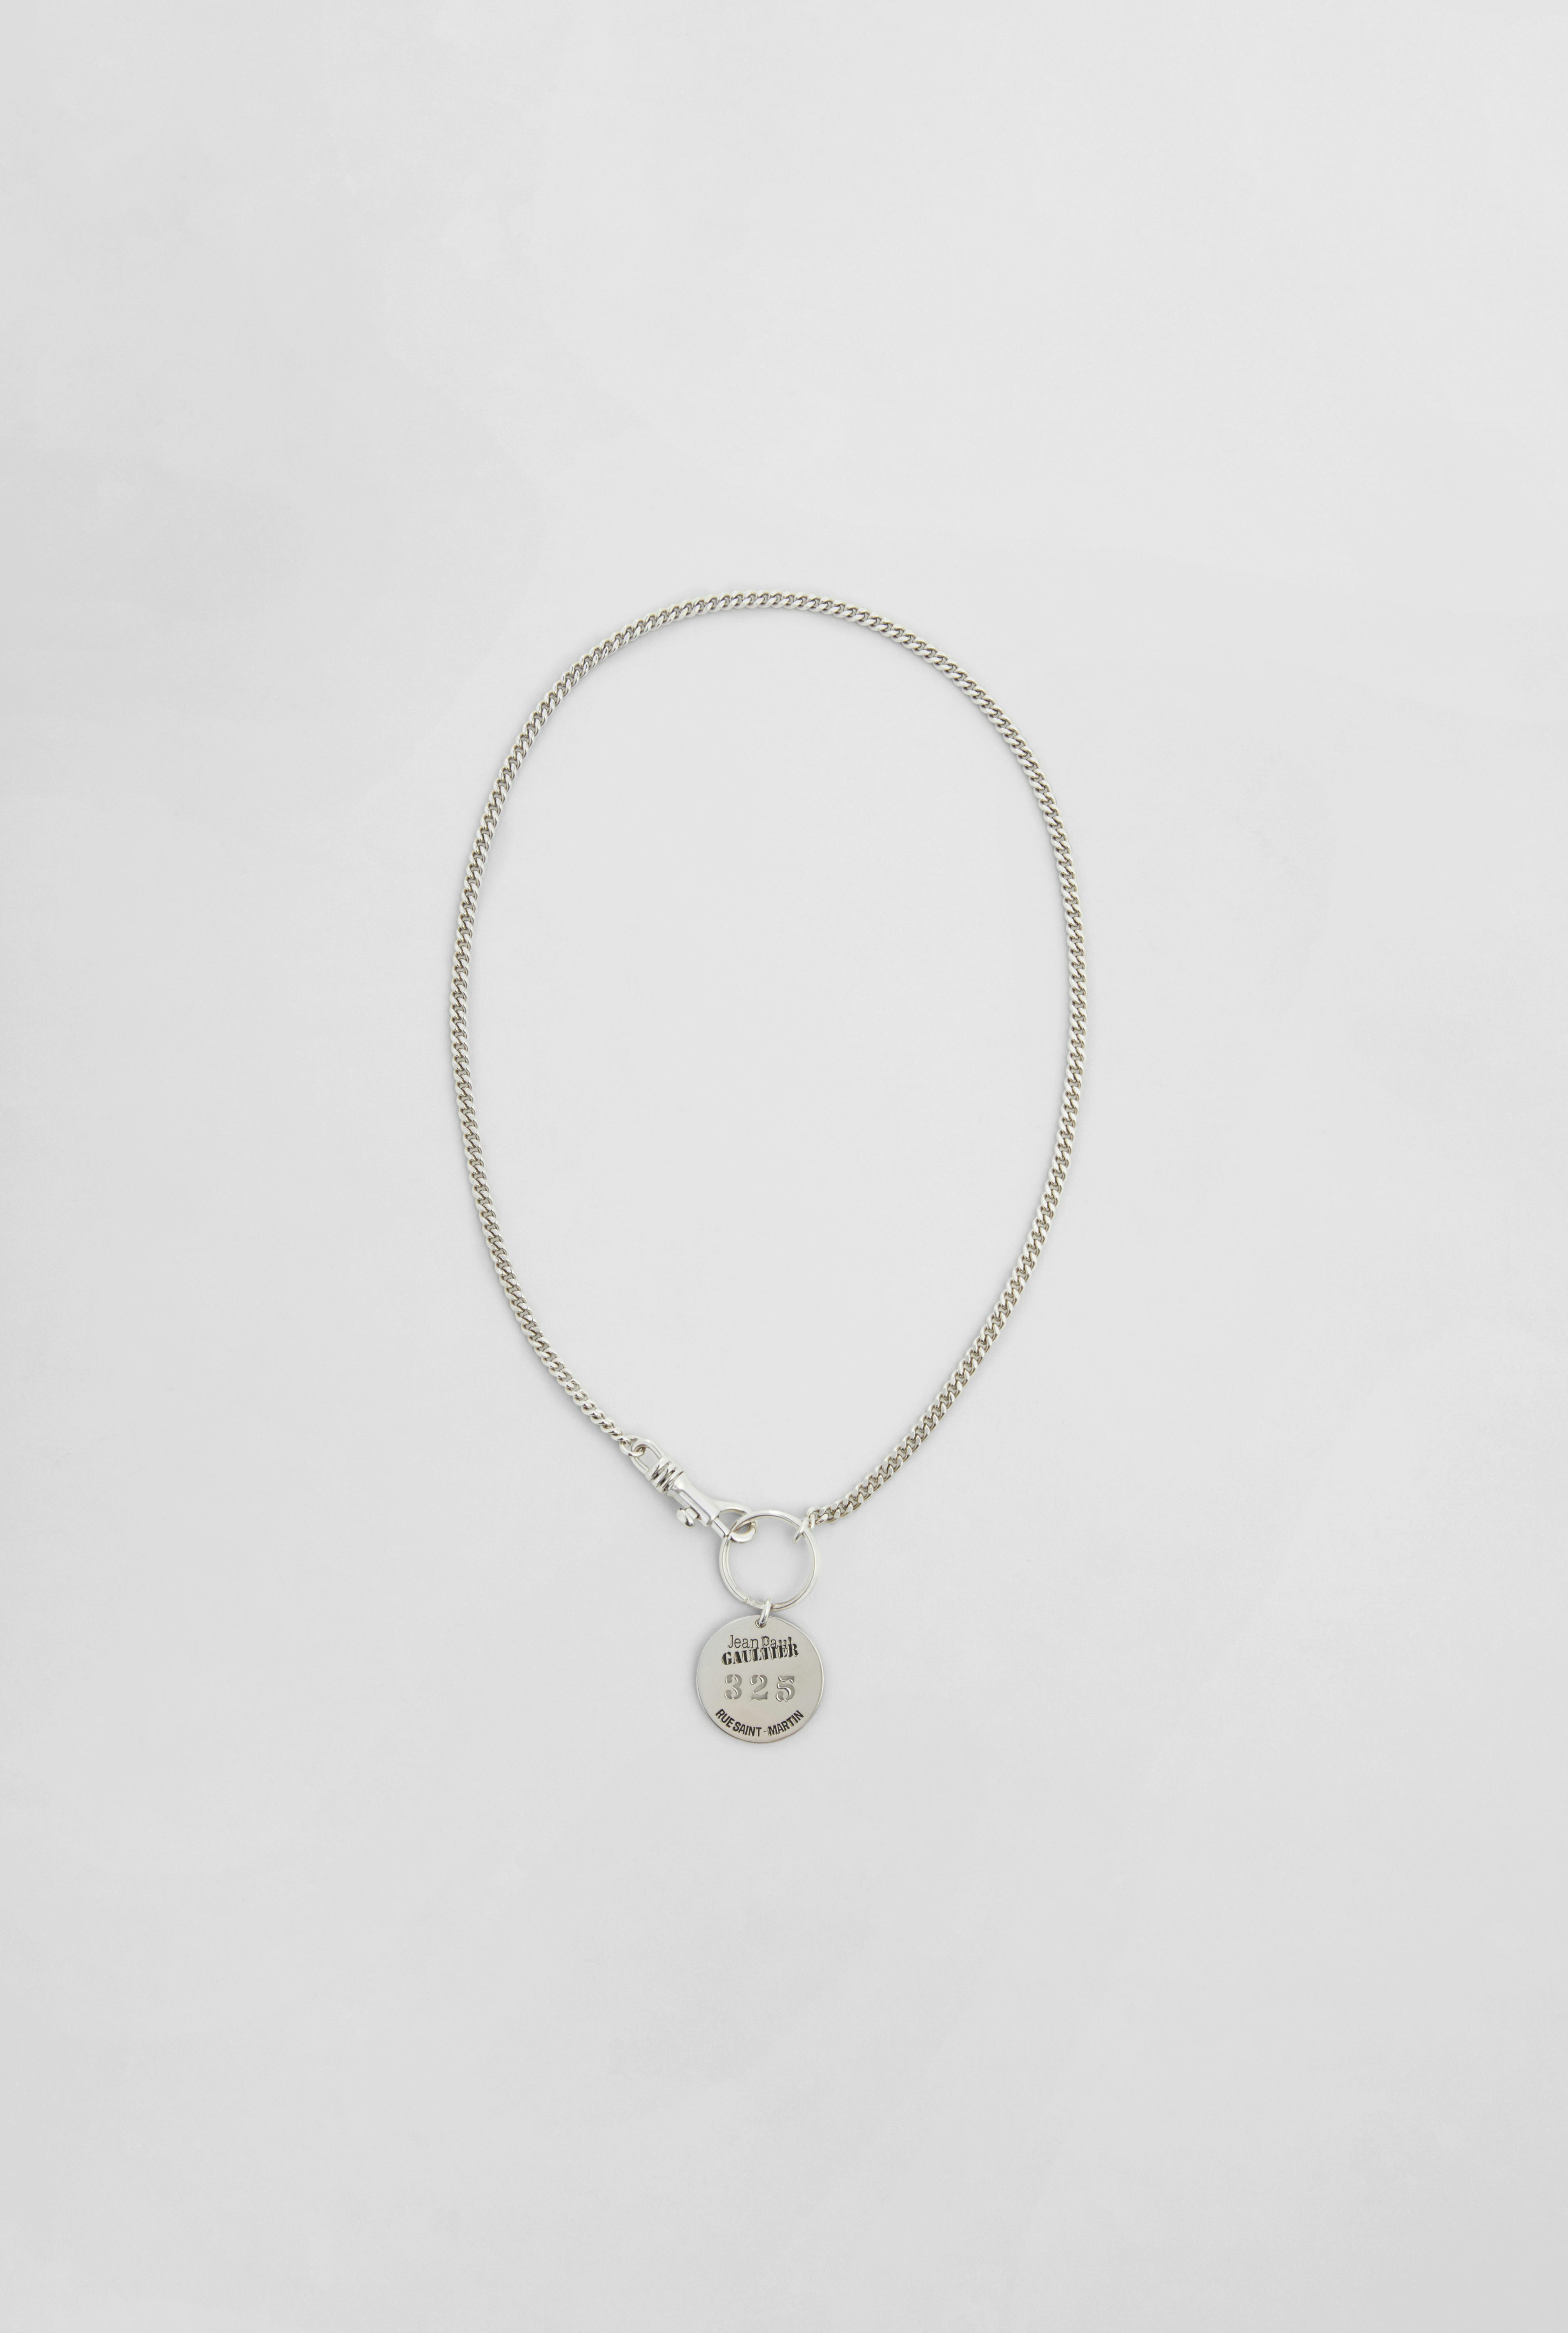 The 325 necklace